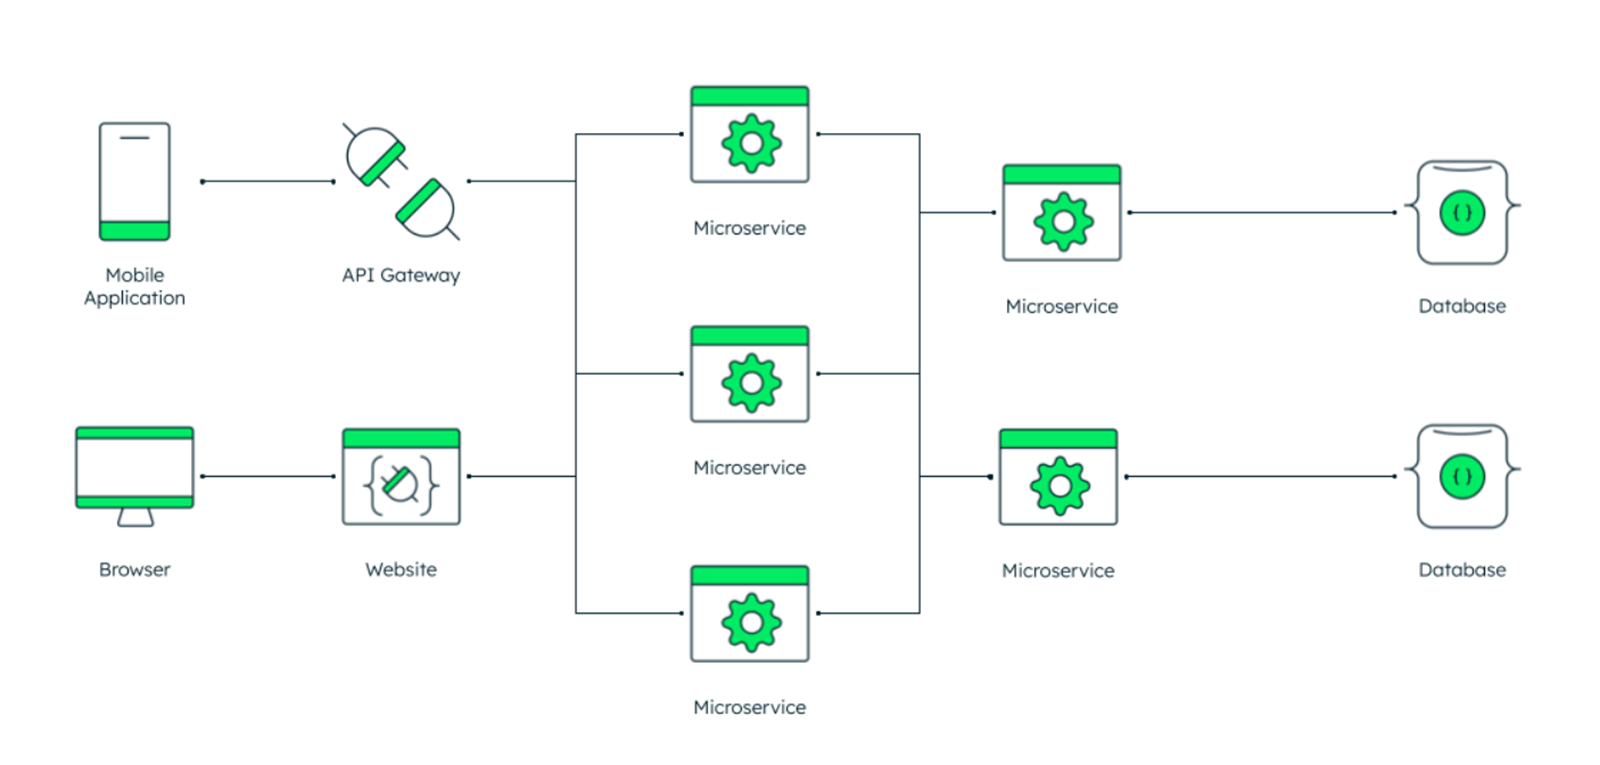 Benefits of Microservices Architecture
